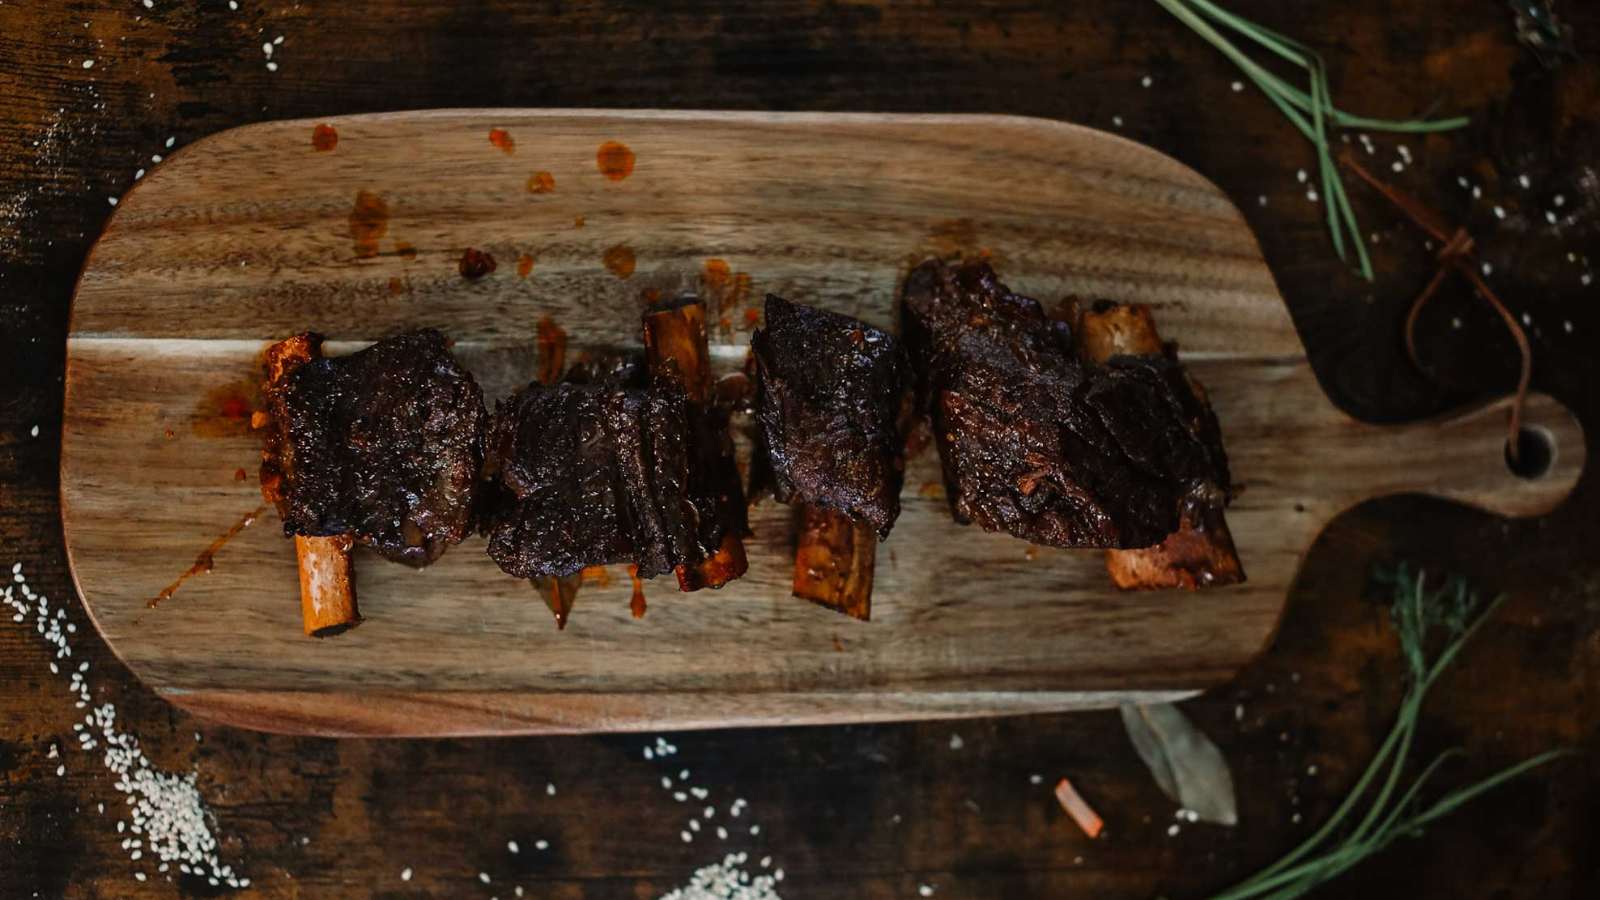 Braised beef short ribs on a wooden platter.